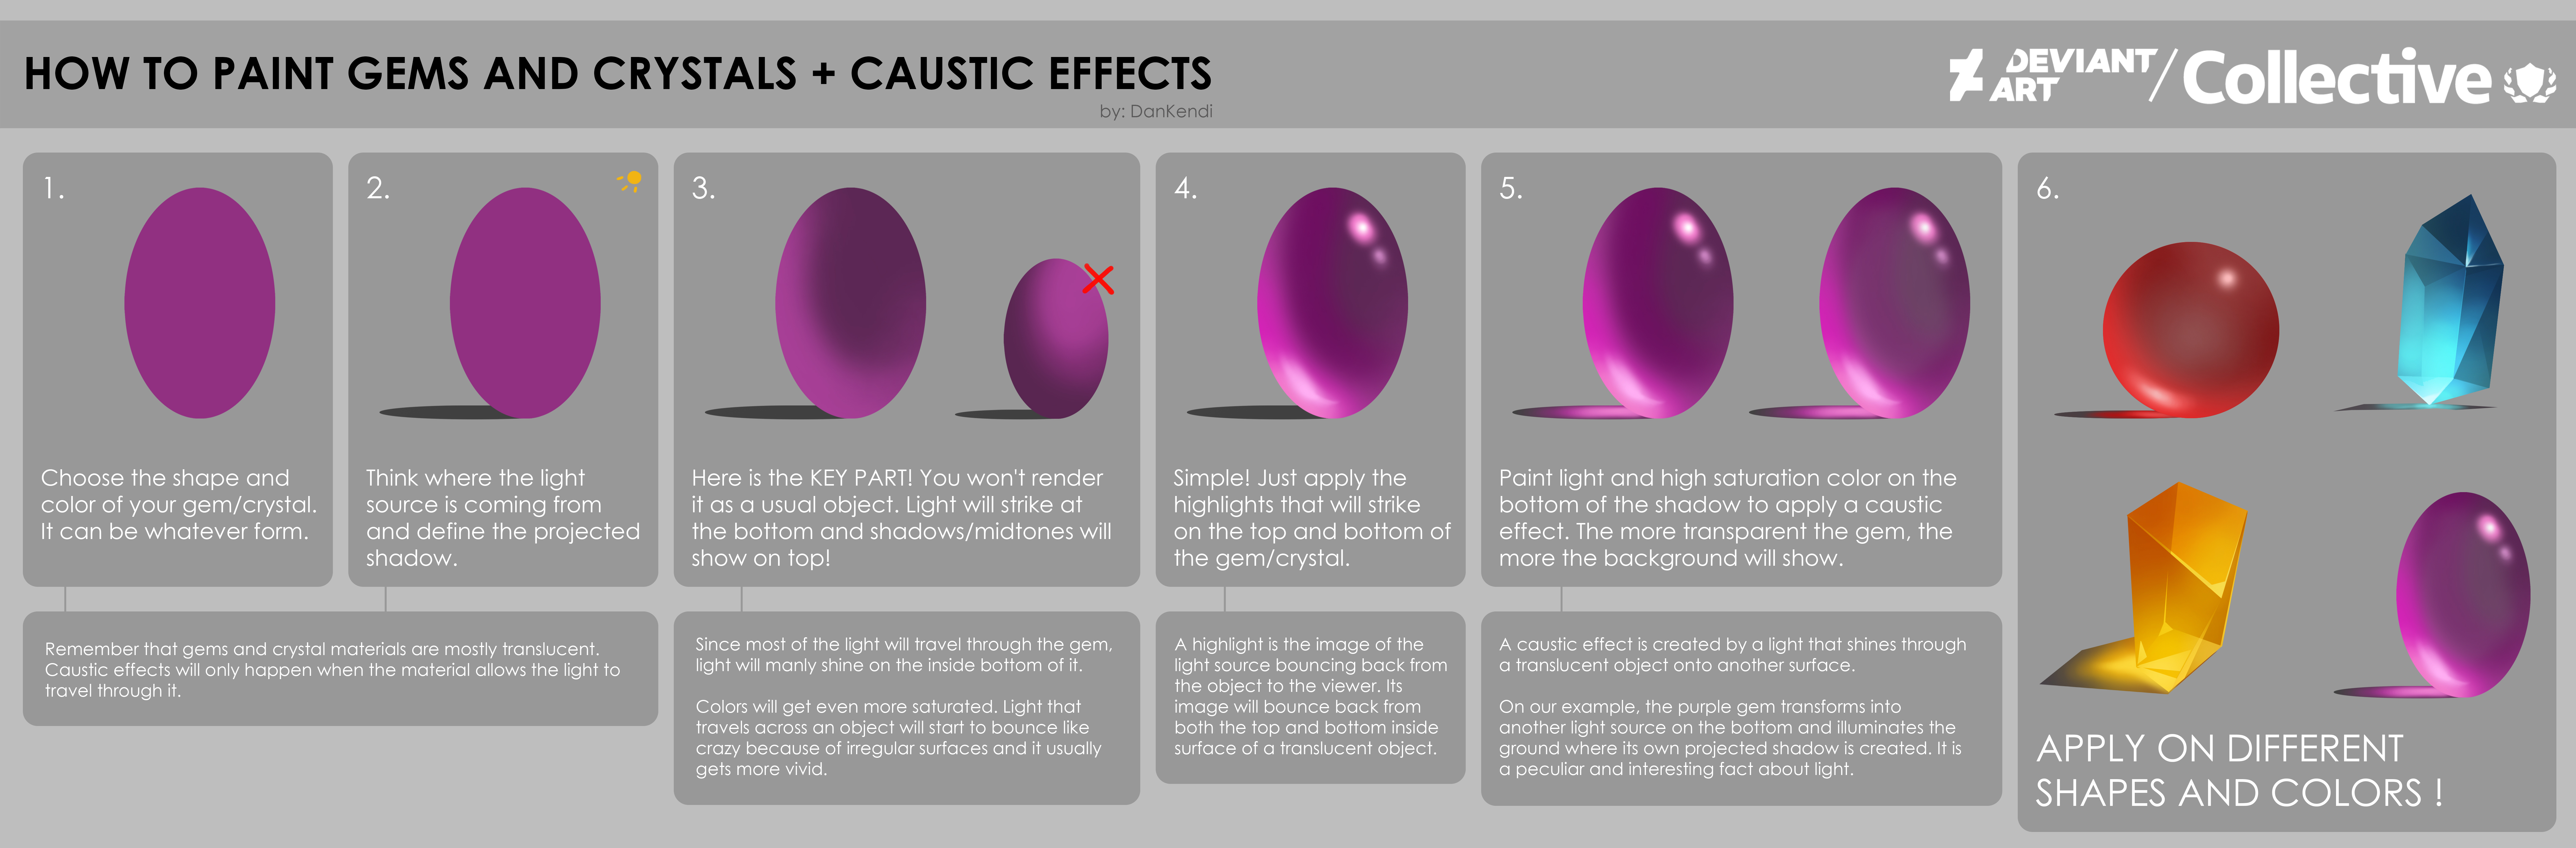 How to Paint Gems and Crystals + Caustic Effects by DanKendi on DeviantArt